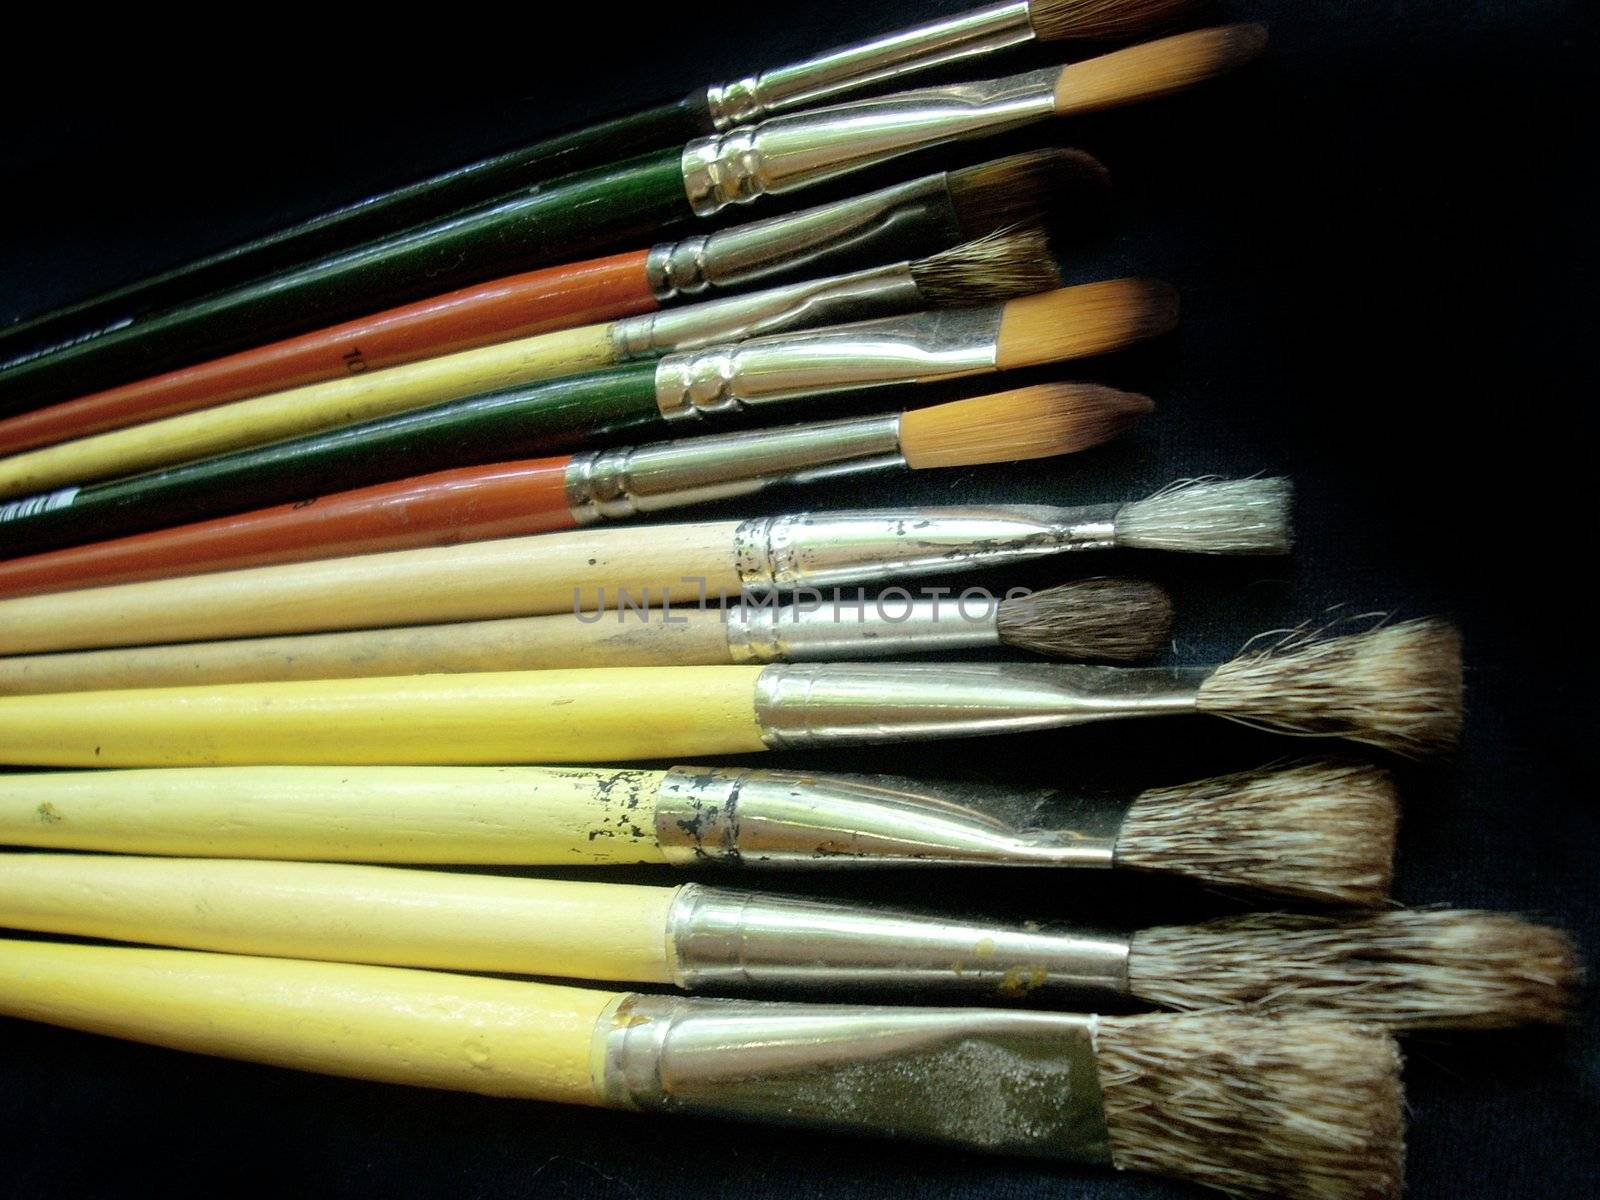 These are some artistic brushes on a black background